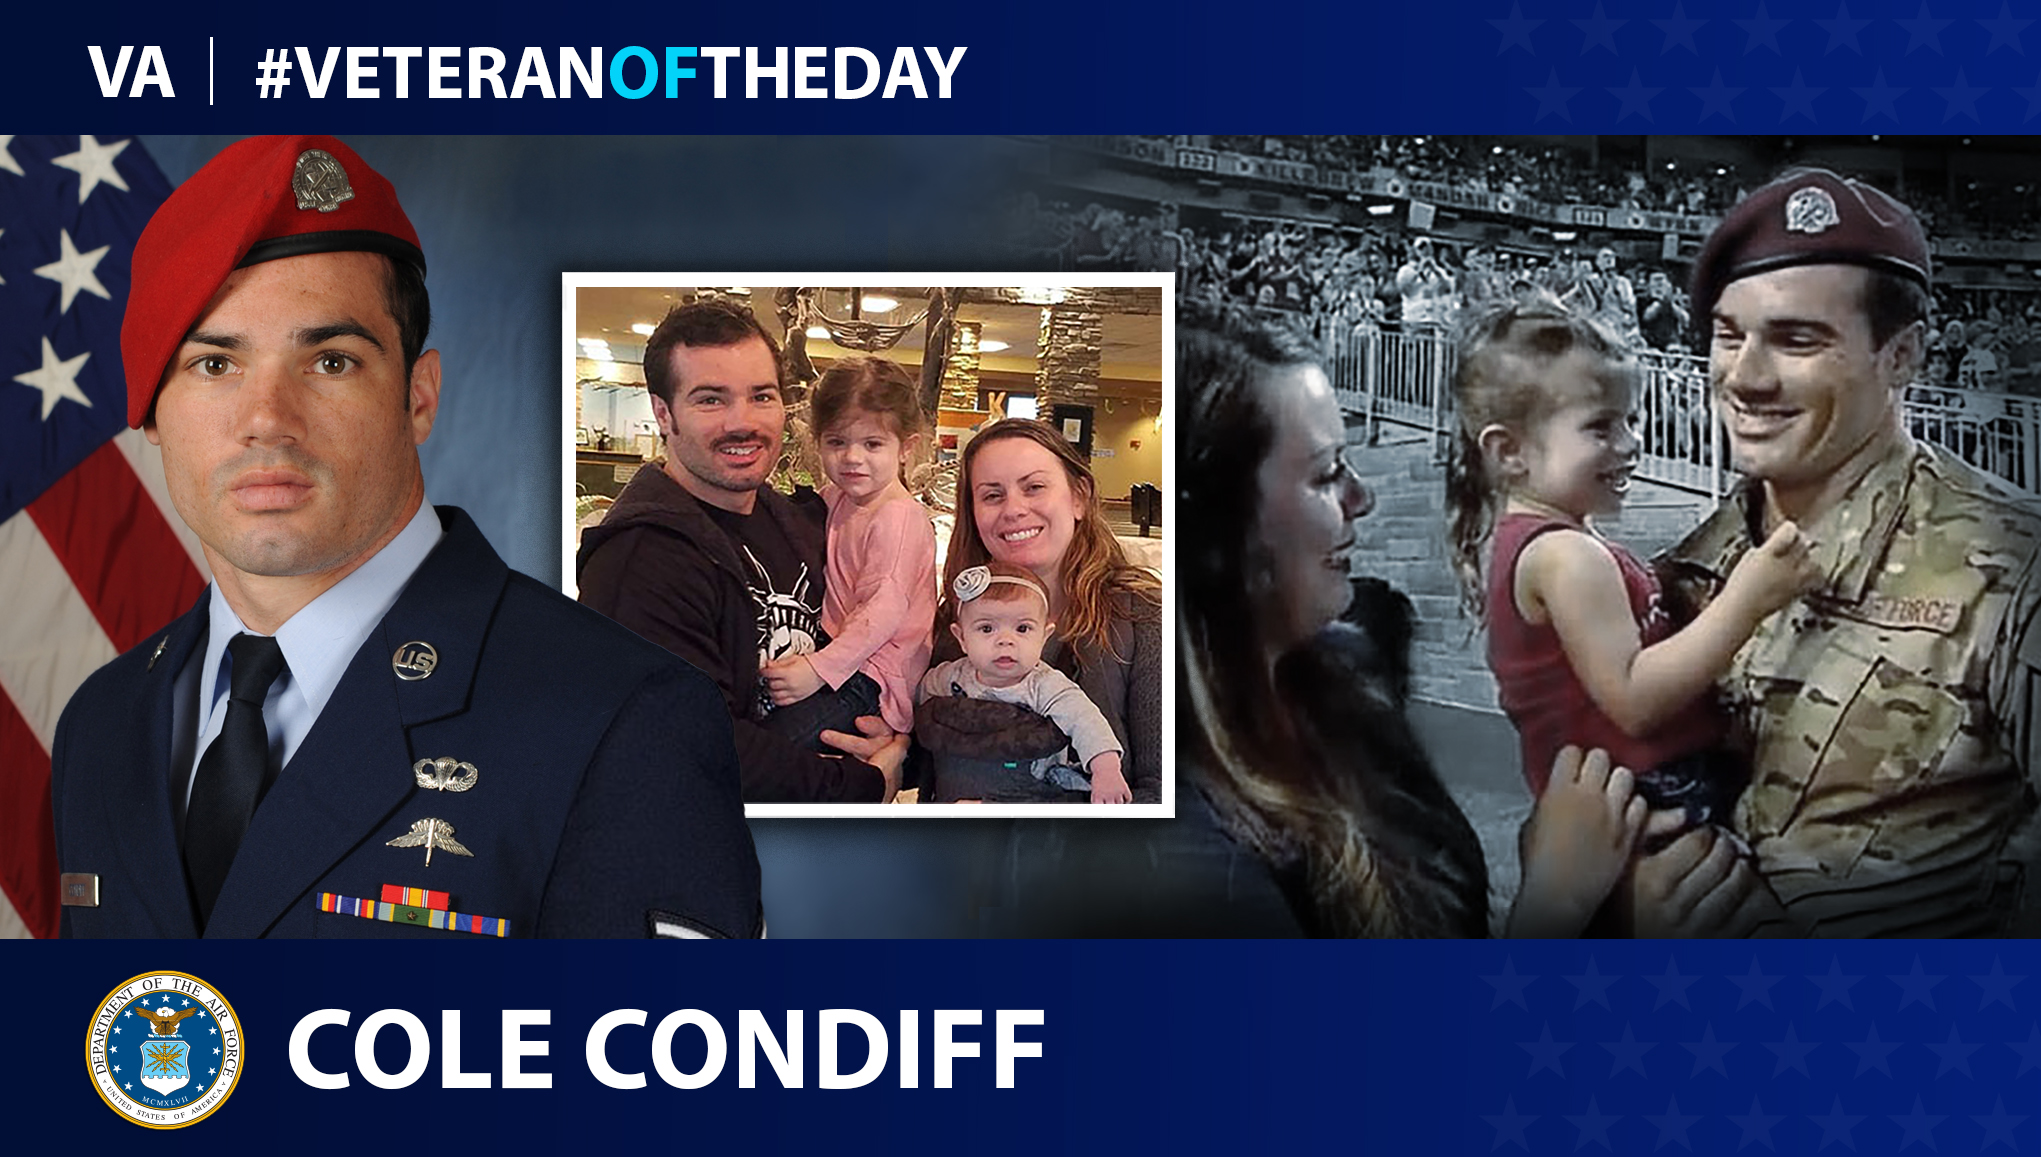 Air Force Veteran Cole Condiff is today’s Veteran of the Day.